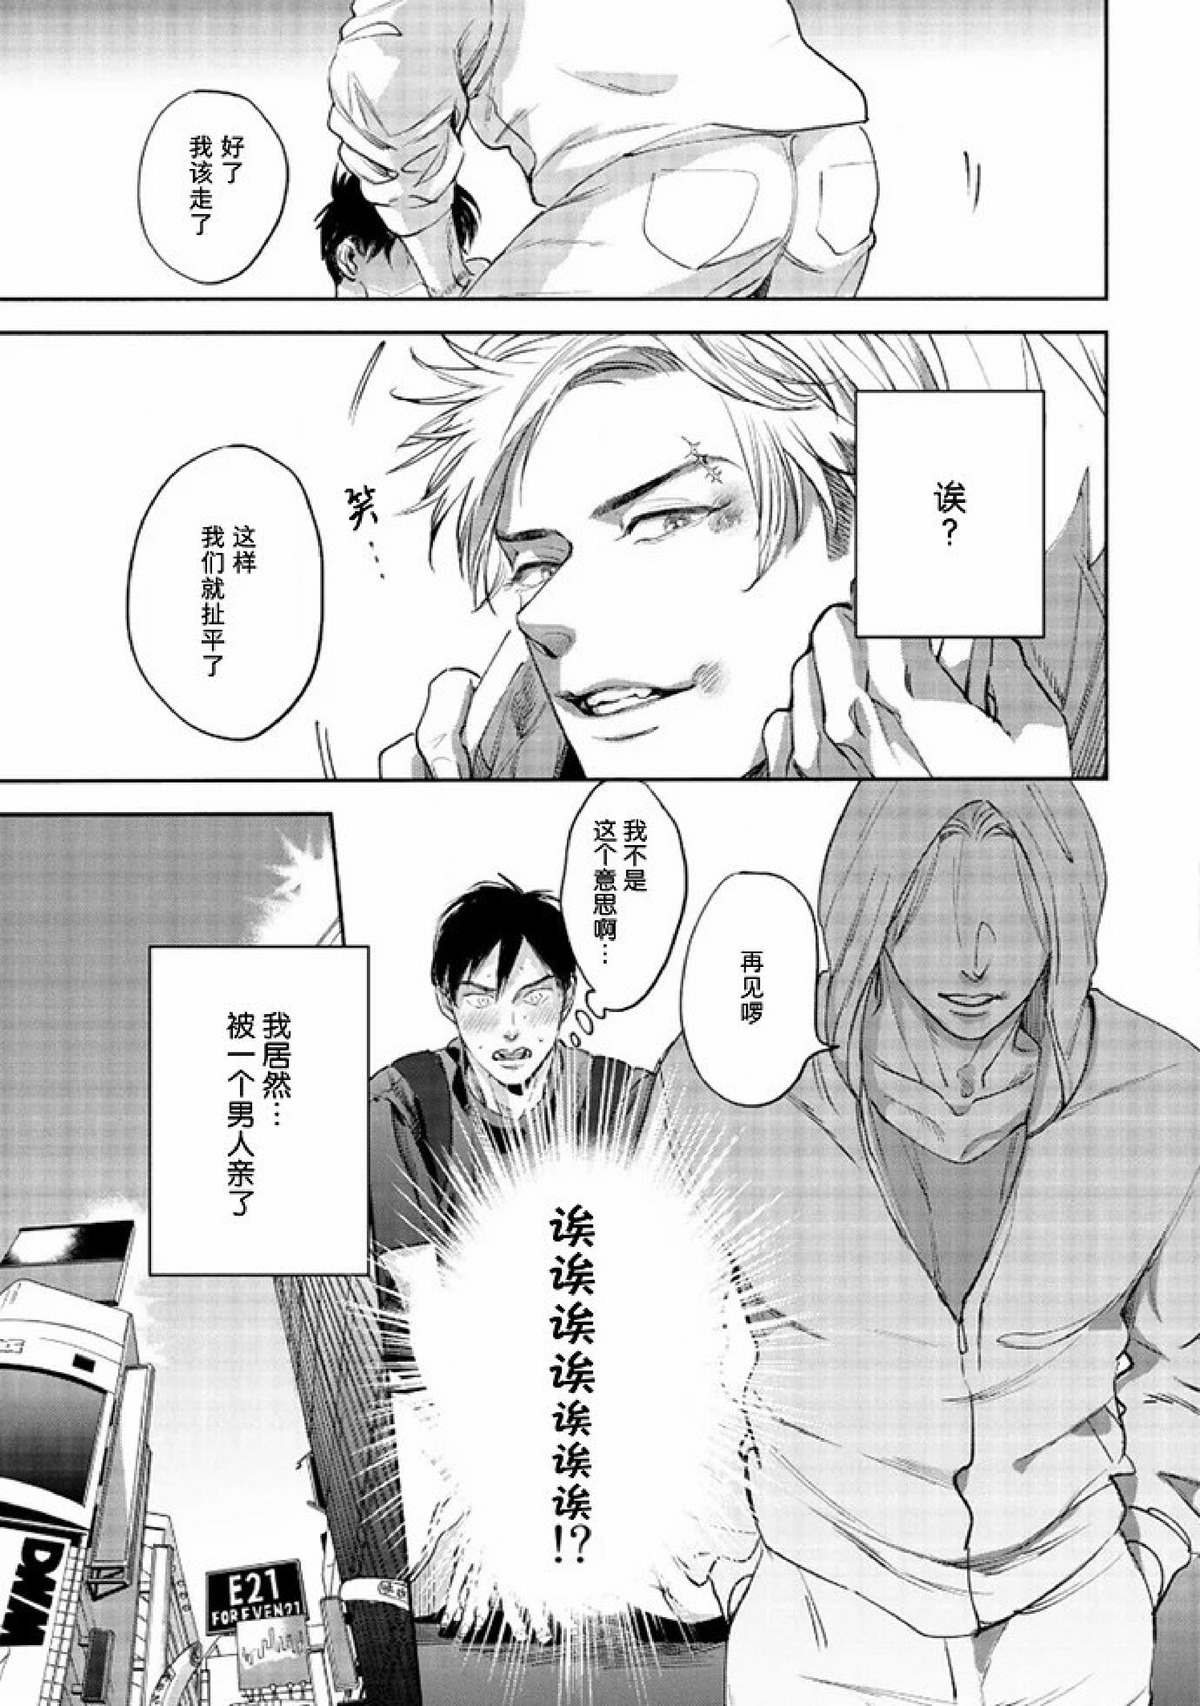 【Two sides of the same coin[耽美]】漫画-（上卷01-02）章节漫画下拉式图片-39.jpg